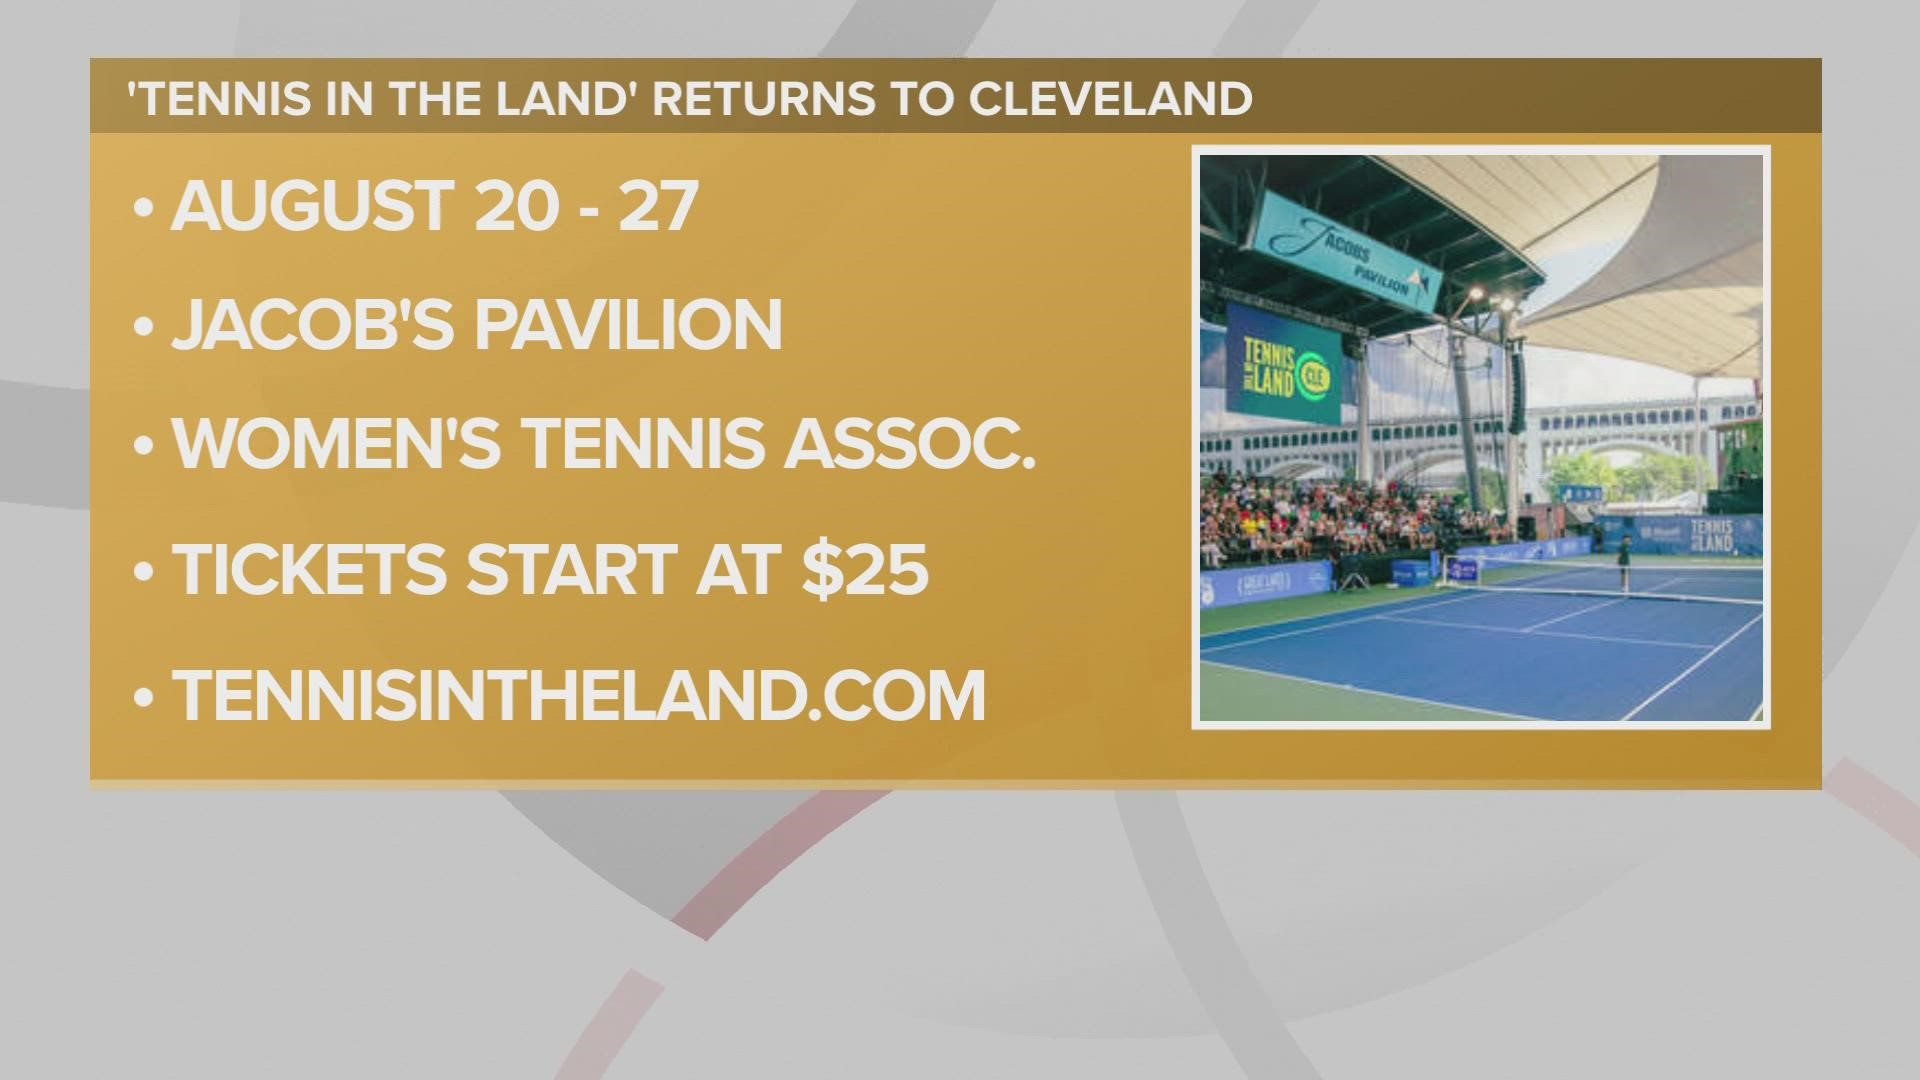 Tennis In The Land returns to Cleveland for 2022 event